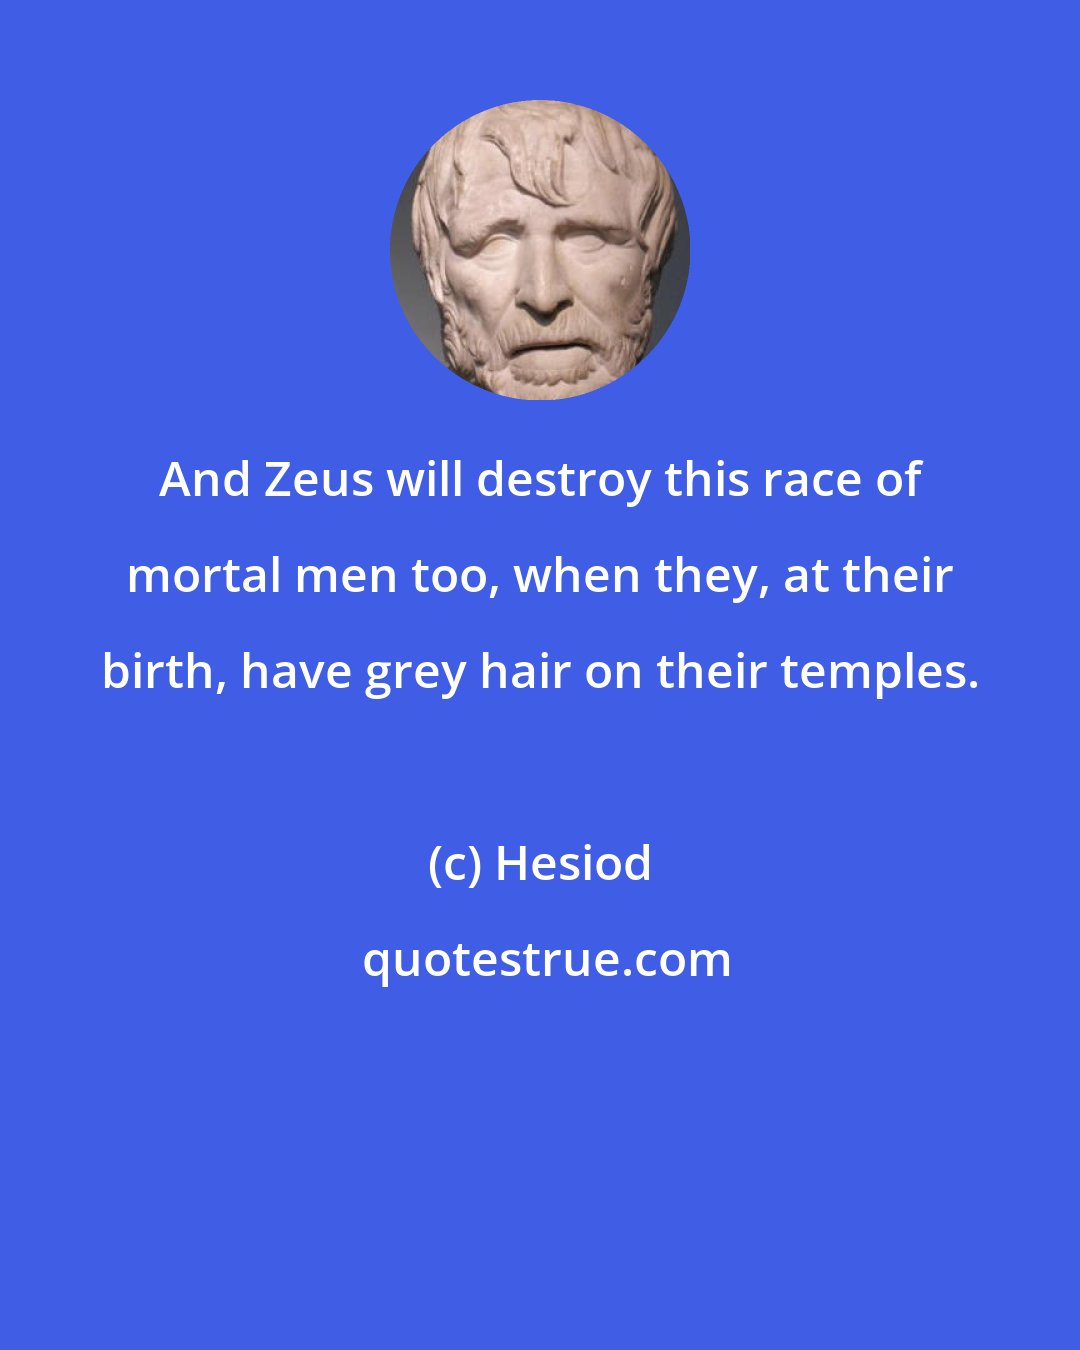 Hesiod: And Zeus will destroy this race of mortal men too, when they, at their birth, have grey hair on their temples.